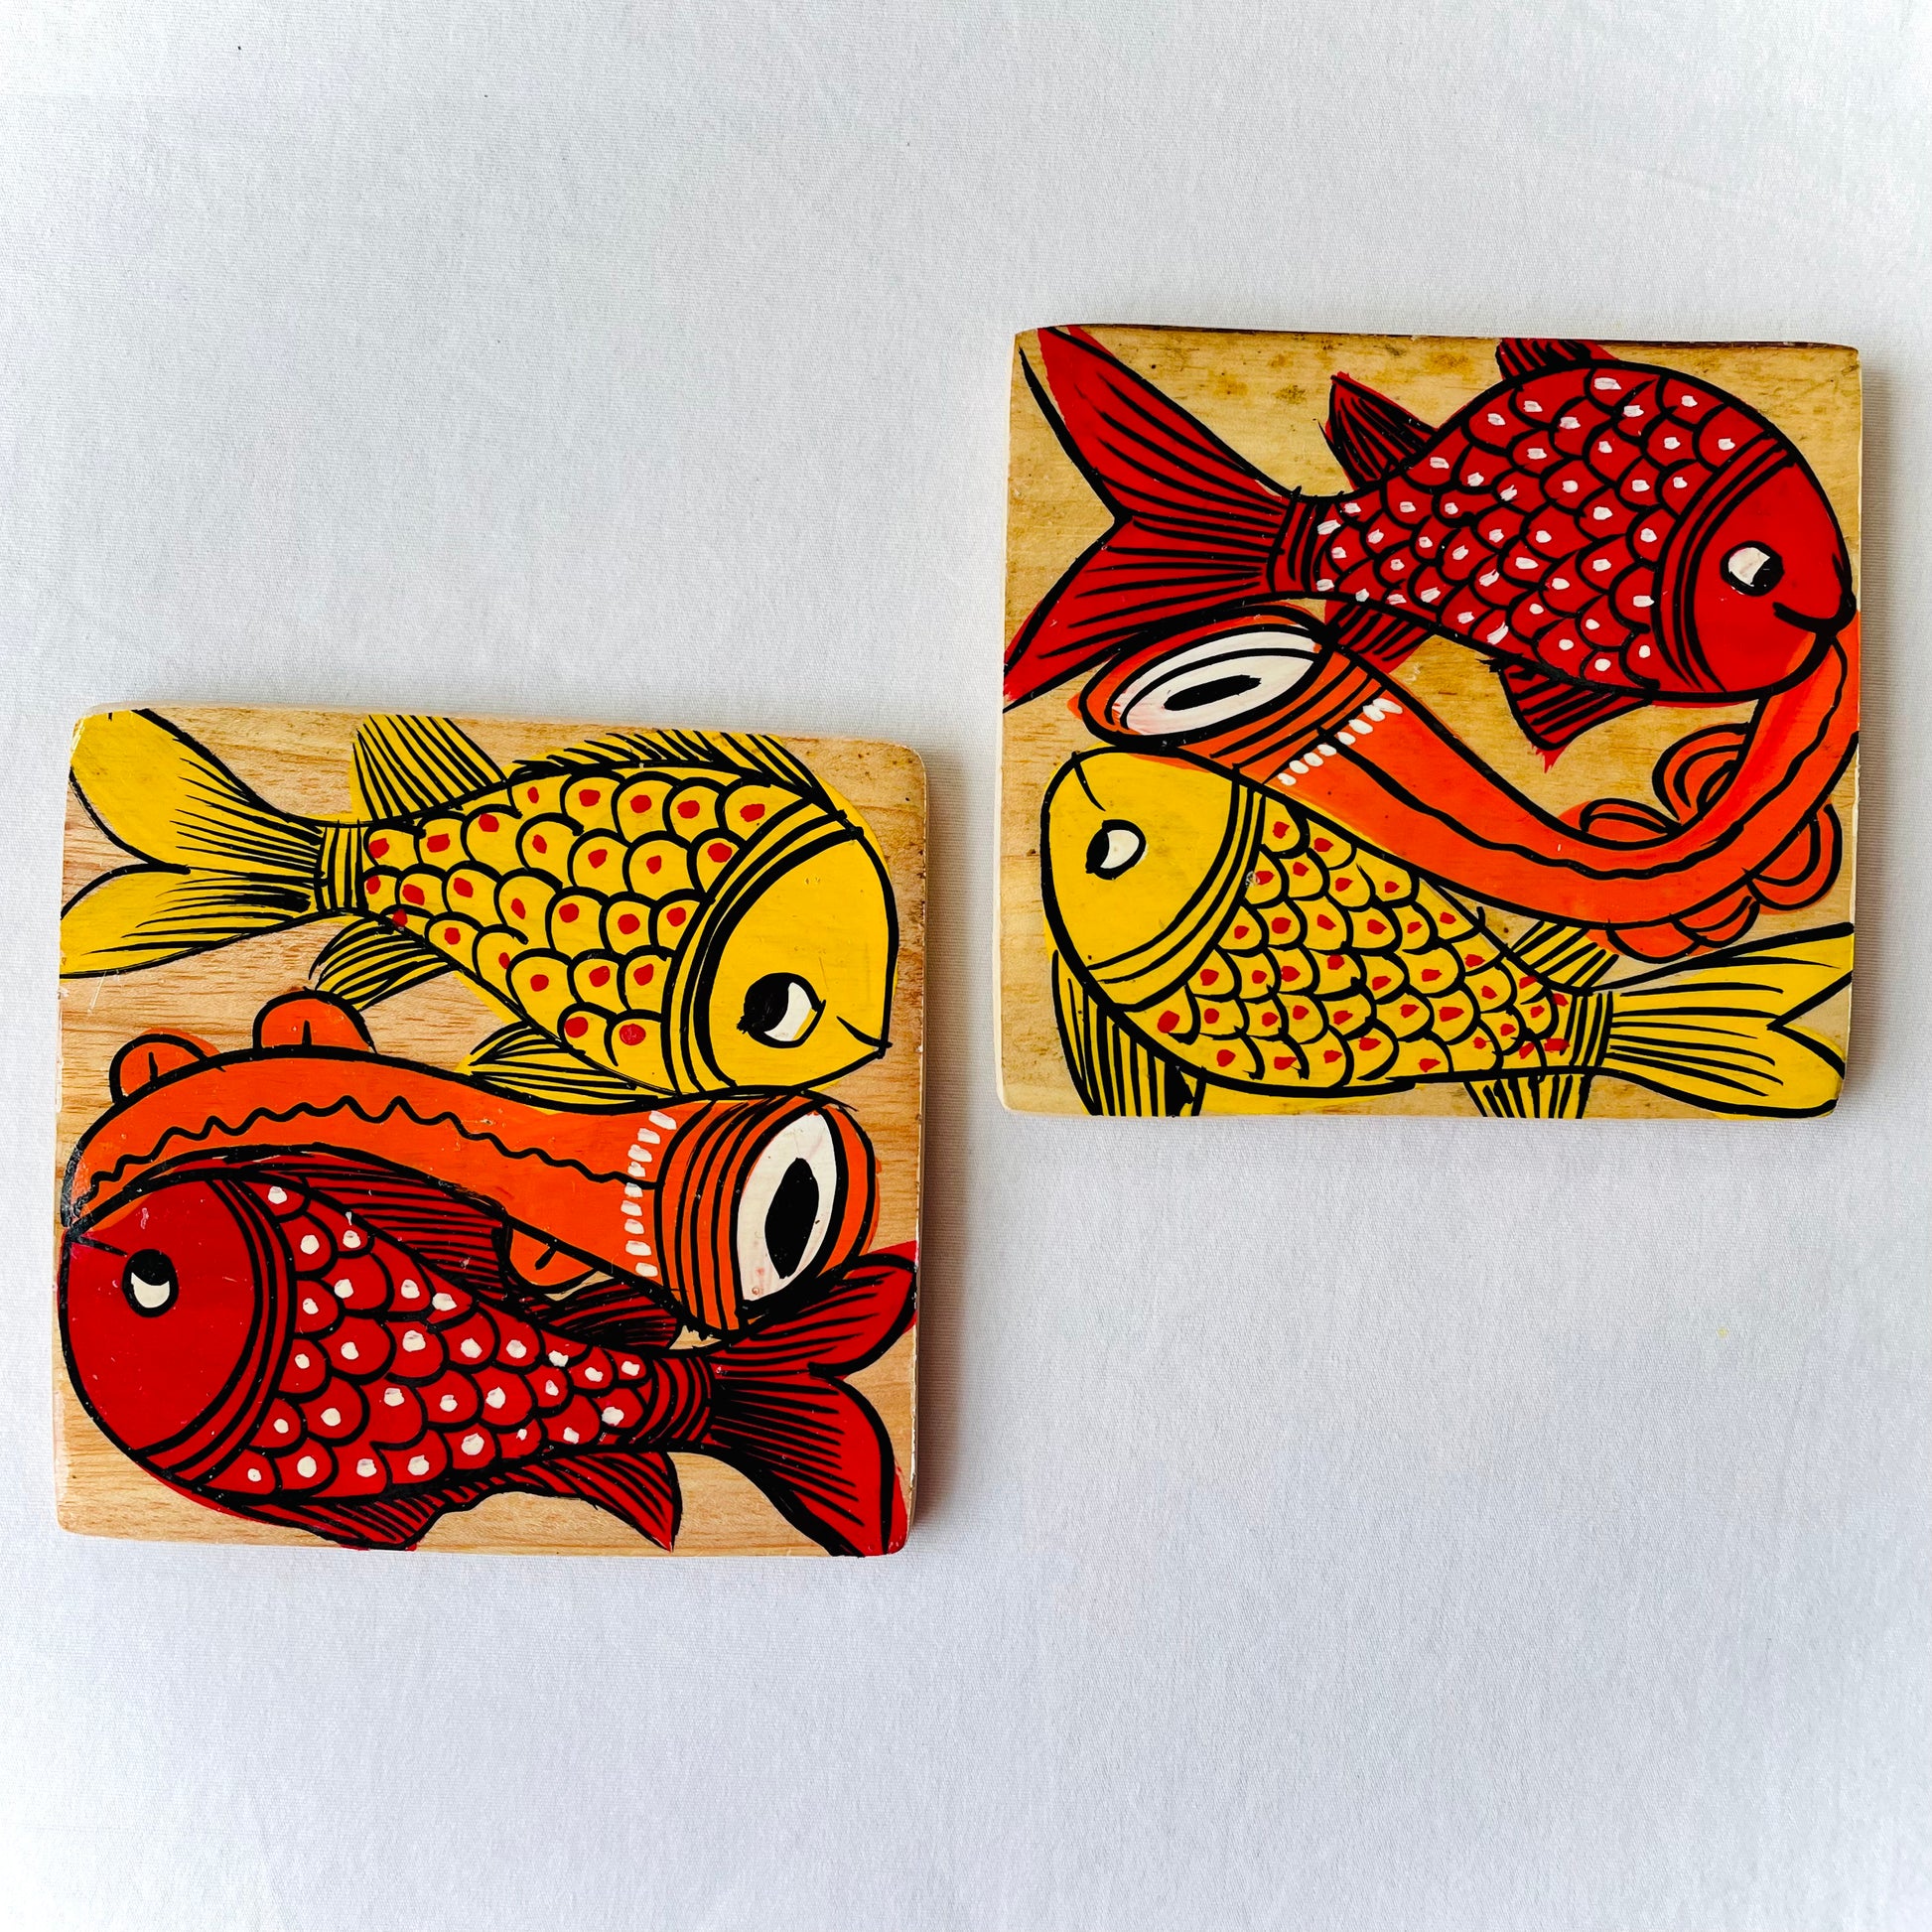 Alokya - 100% natural, Pattachitra painted terracotta coasters  - Square coasters: fish painted on the surface.